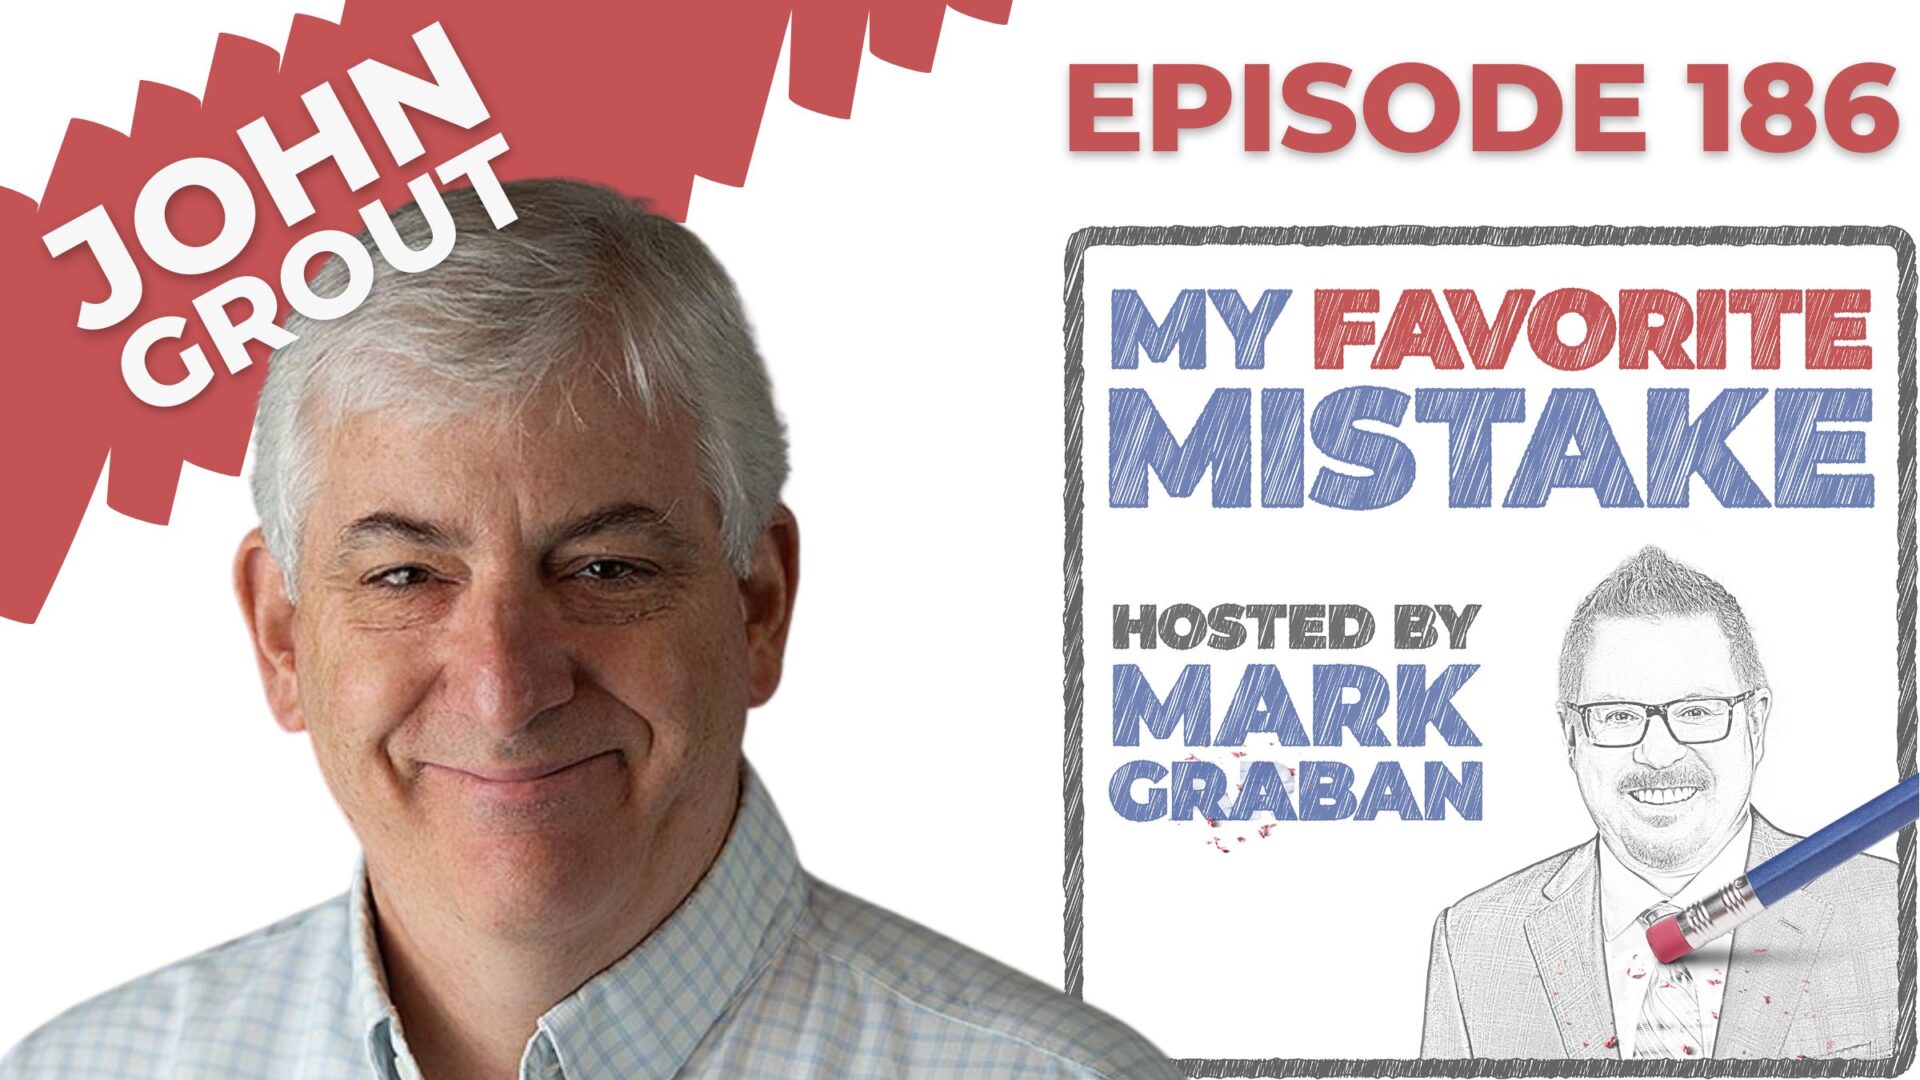 Professor John Grout on Preventing Mistakes, Yet Learning From Them When They Happen